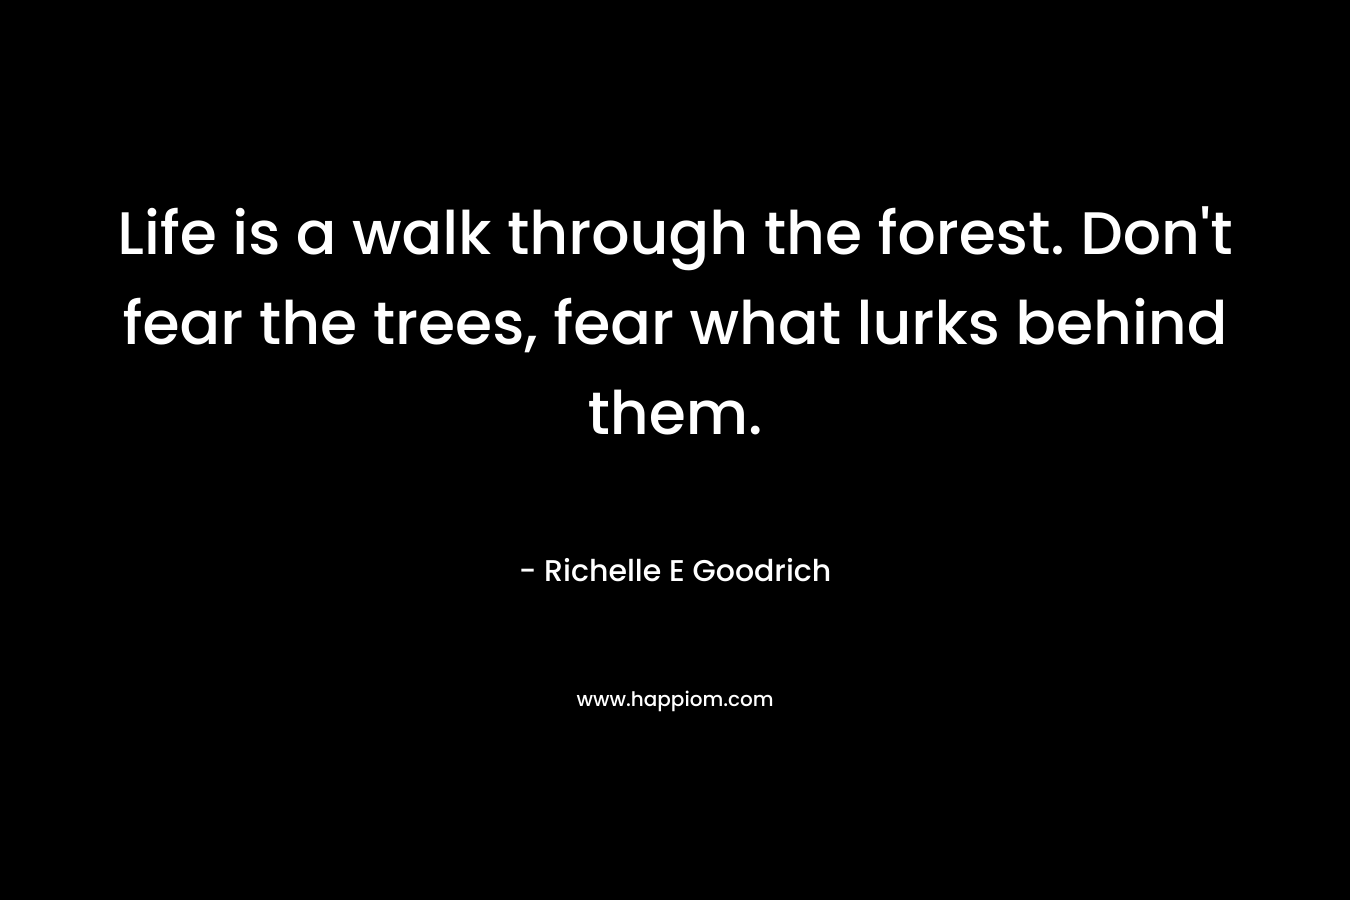 Life is a walk through the forest. Don’t fear the trees, fear what lurks behind them. – Richelle E Goodrich